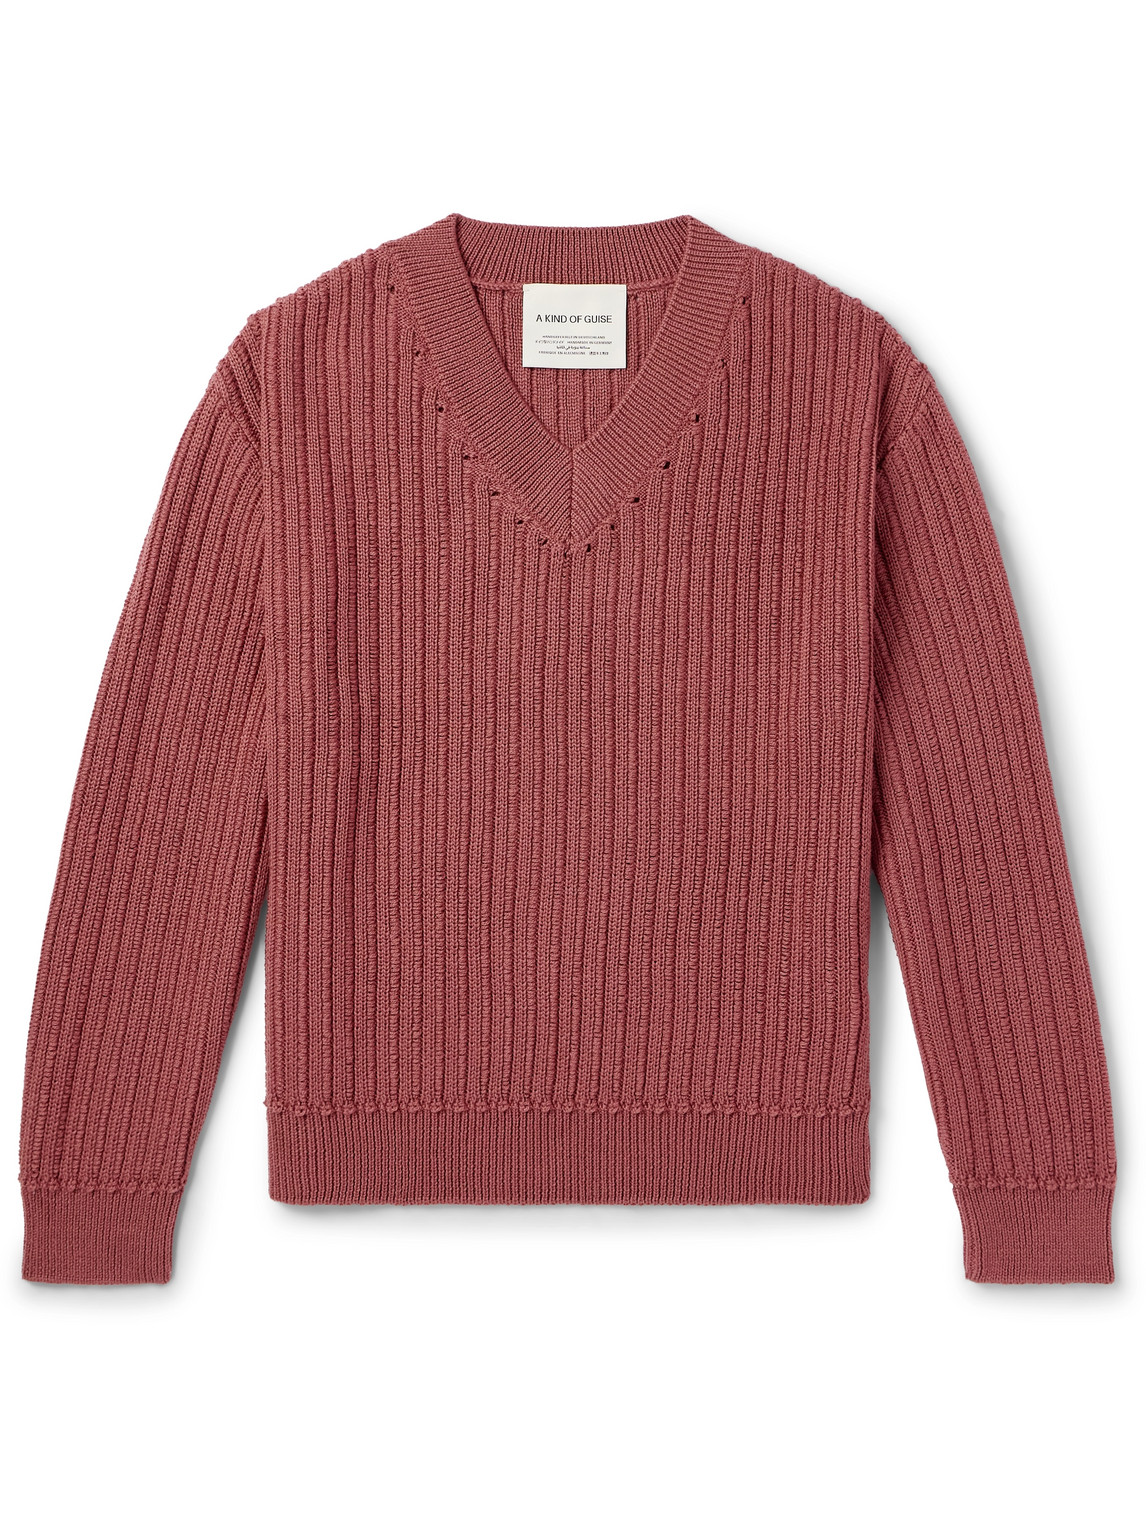 A Kind Of Guise - Saimir Ribbed Merino Wool and Silk-Blend Sweater - Men - Purple - L von A Kind Of Guise